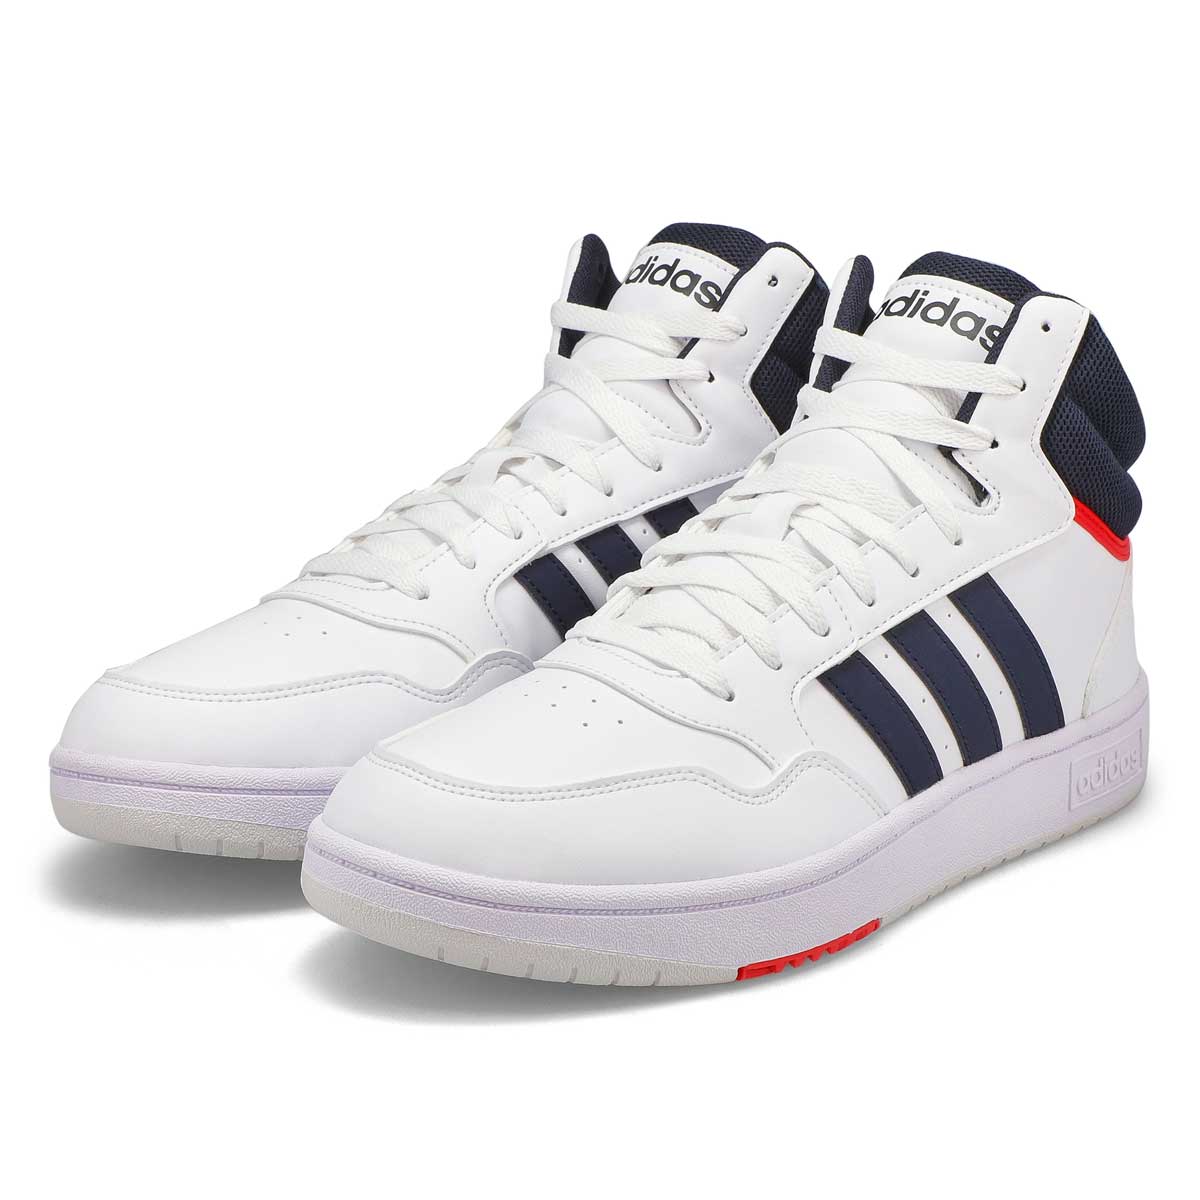 Men's Hoops 3.0 Mid Lace Up Sneaker - White/Ink/Red